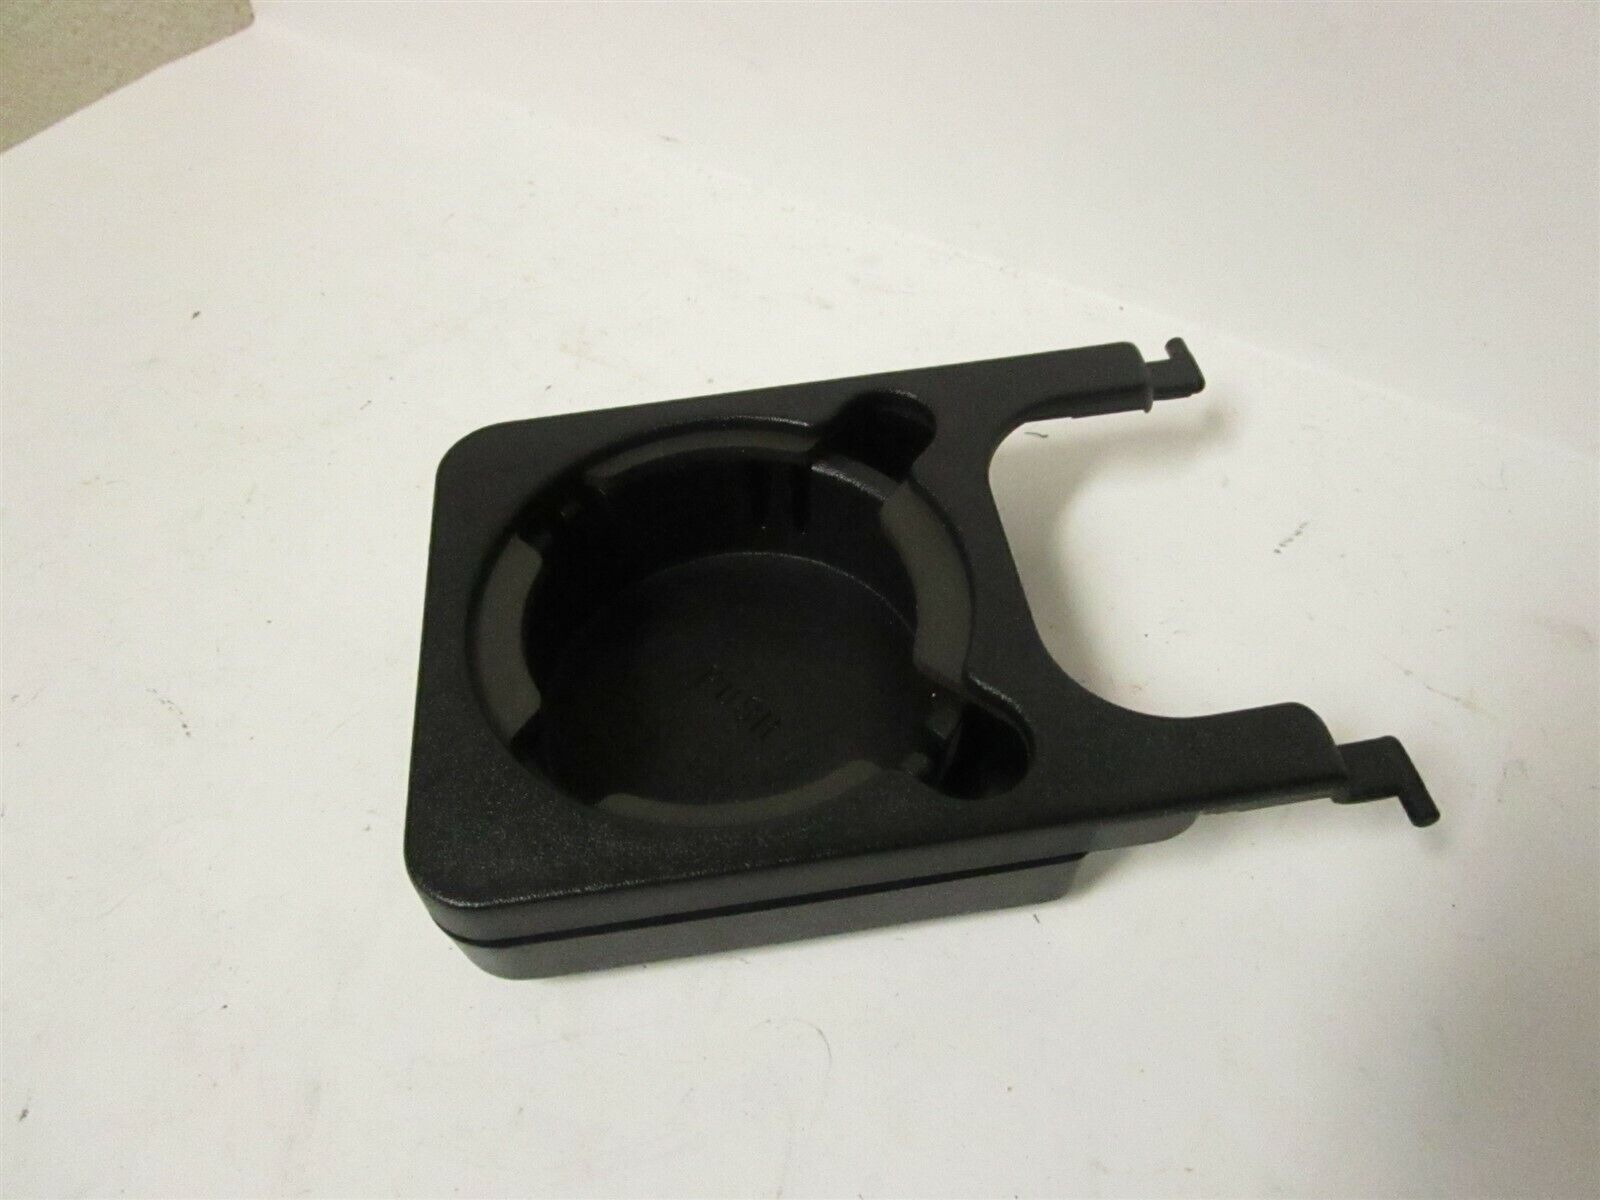 1990-1992 Cadillac Fleetwood Brougham Flip Out Center Console Cupholder OEM